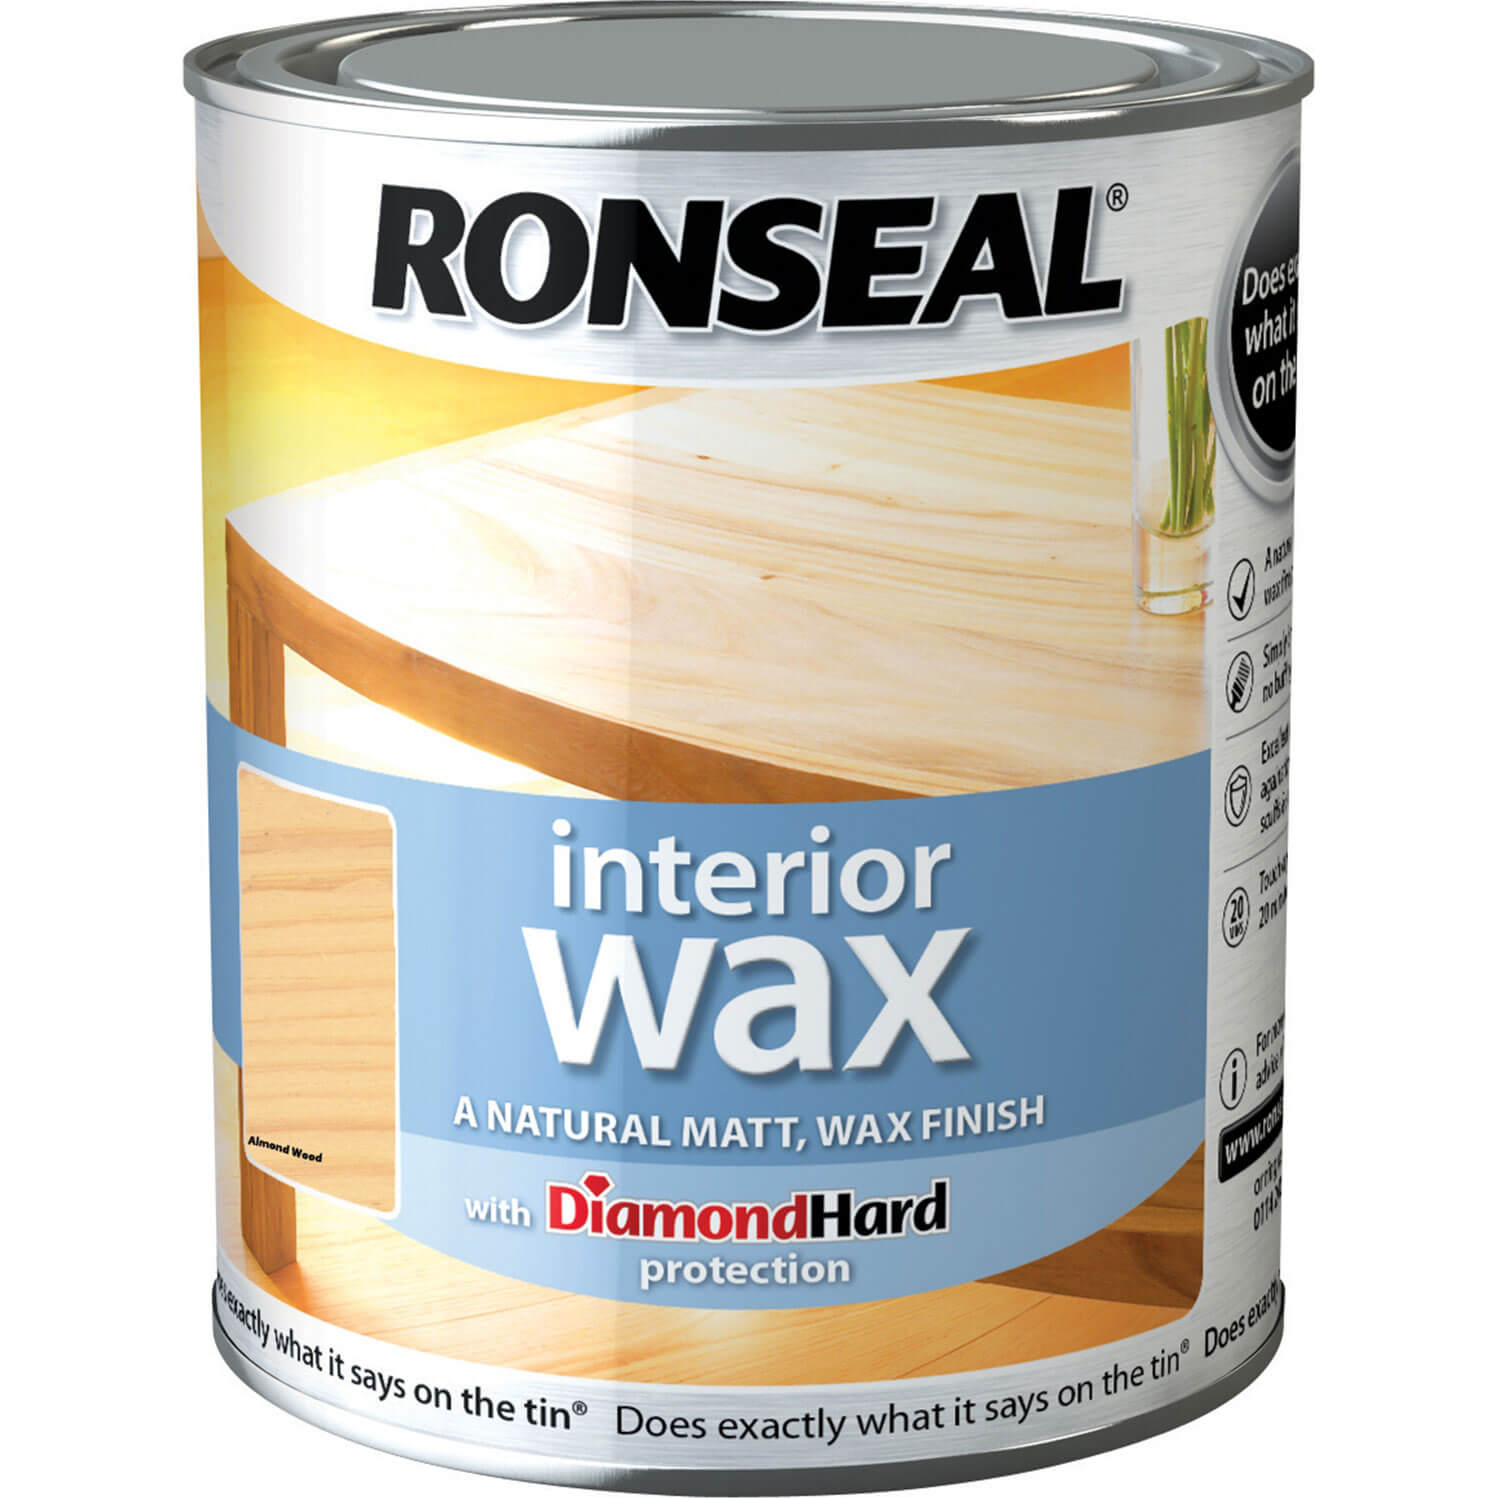 Image of Ronseal Interior Wax Almond Wood 750ml